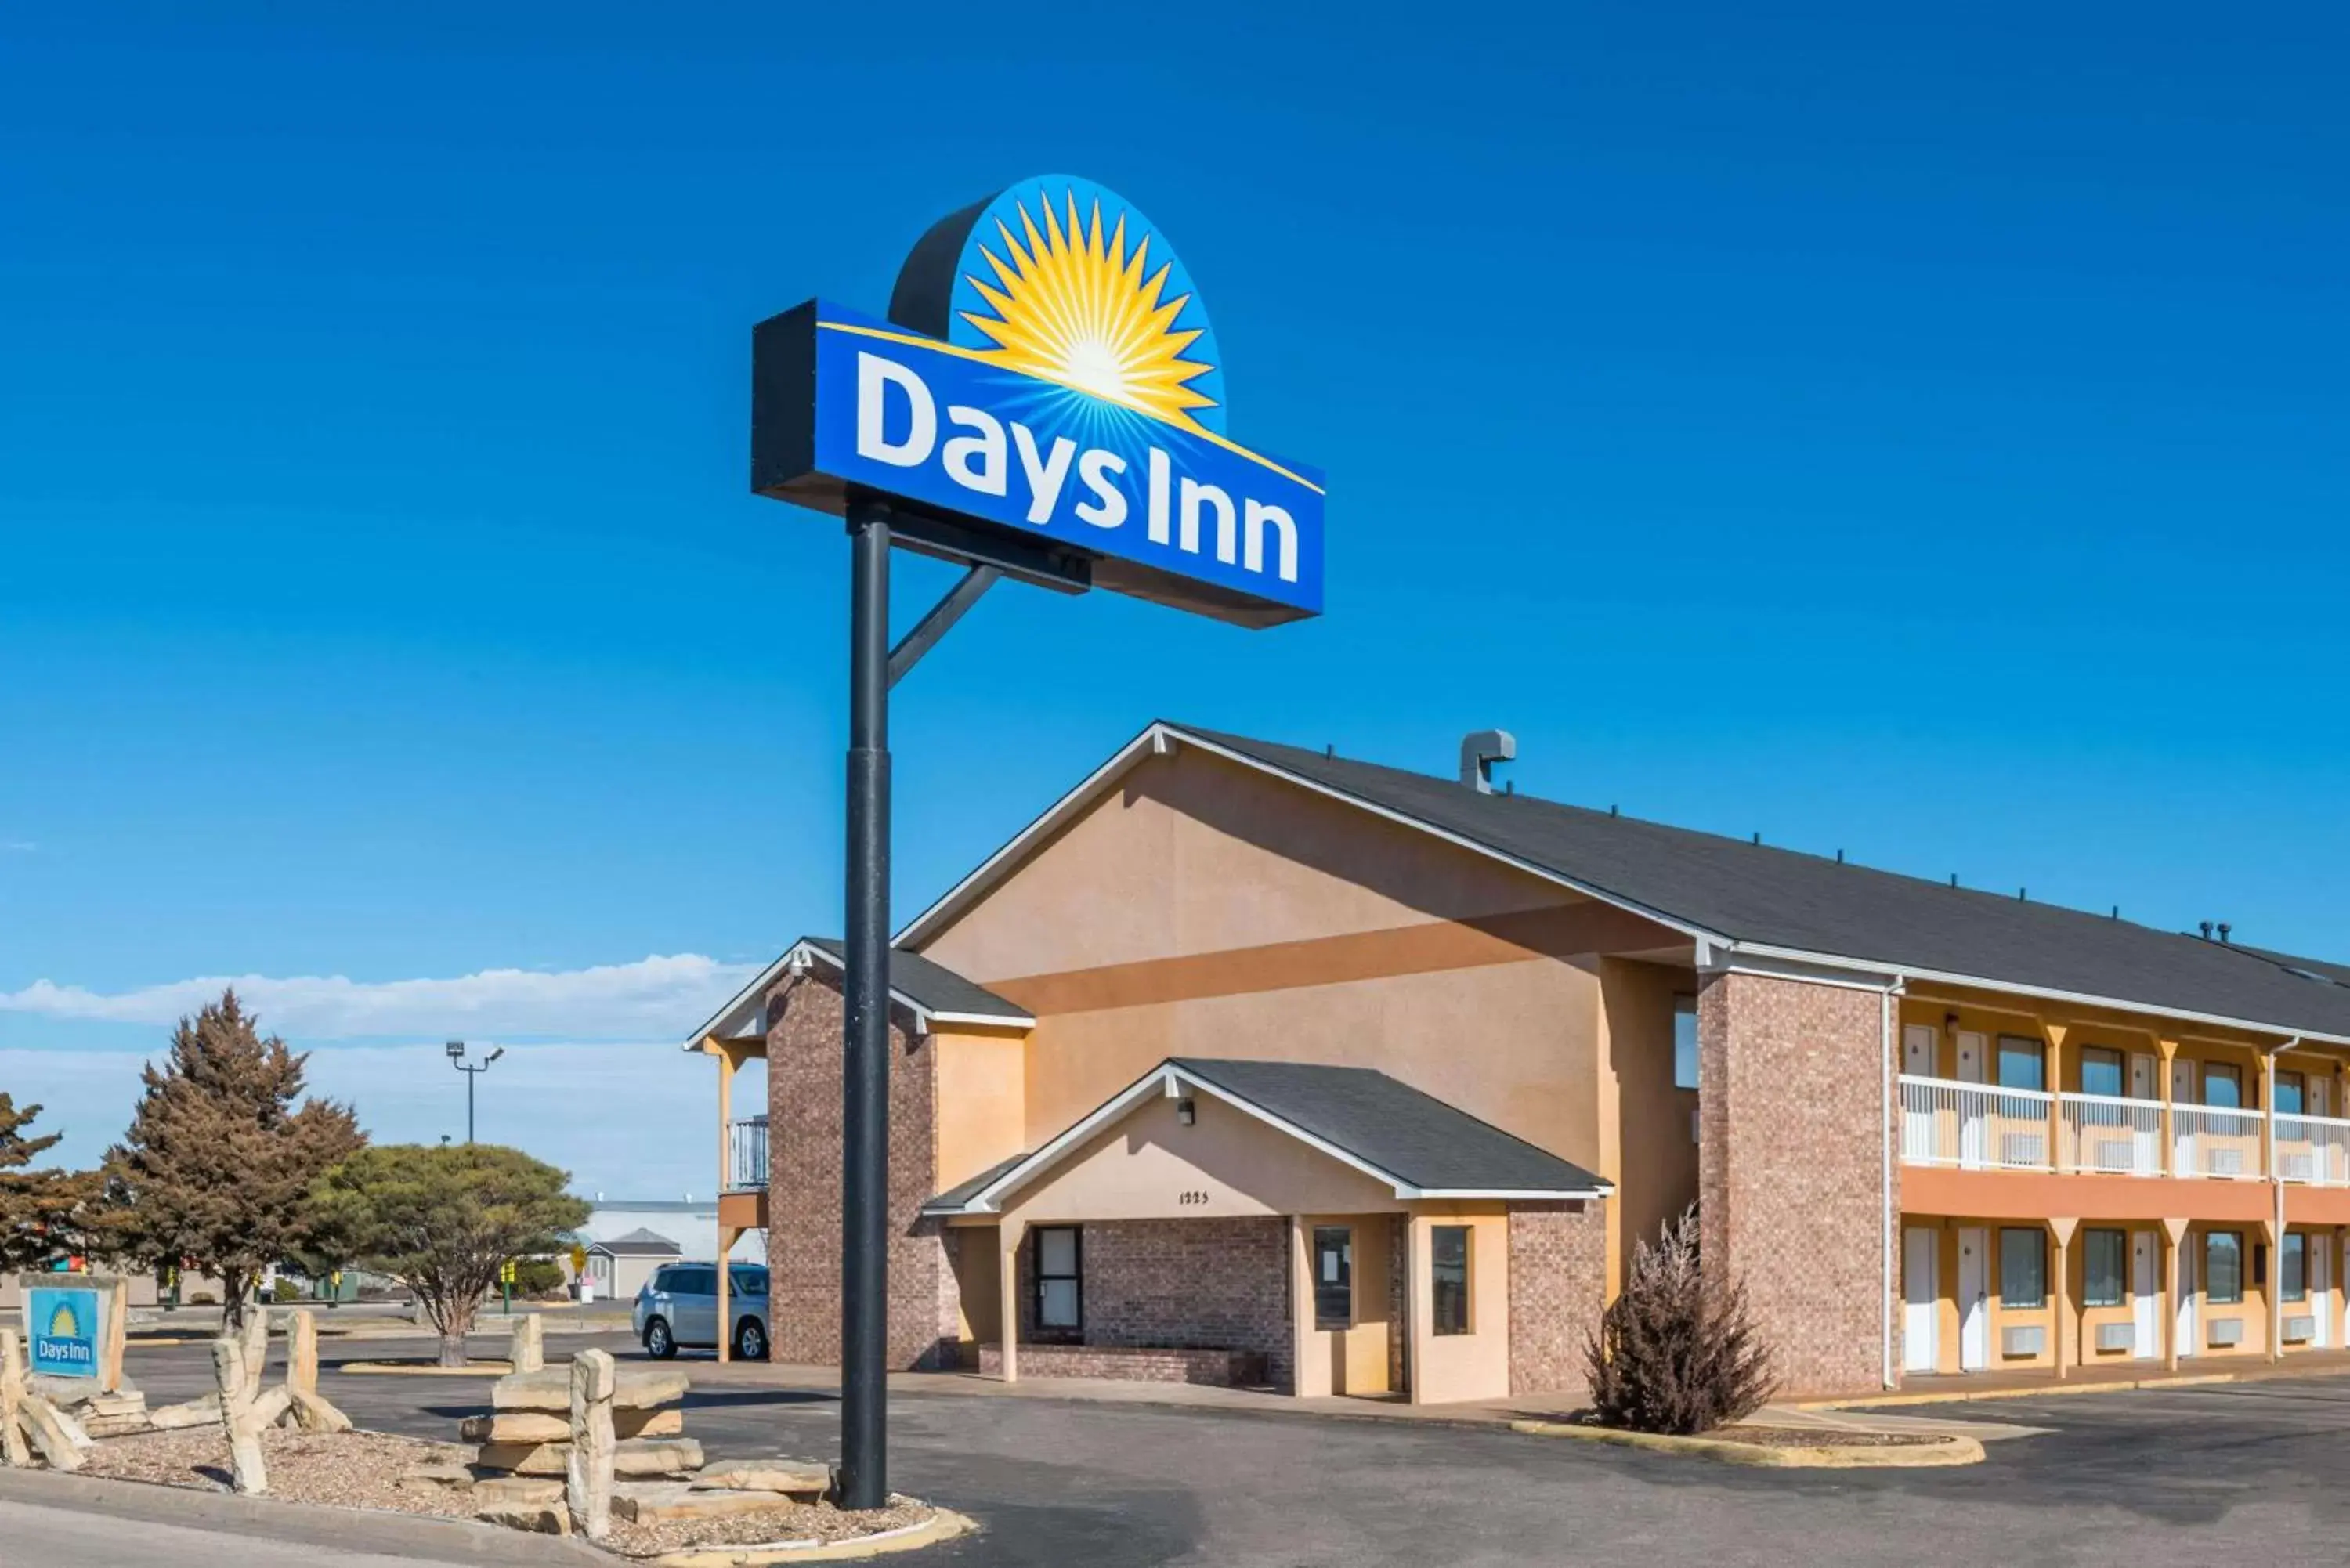 Property building in Days Inn by Wyndham Russell